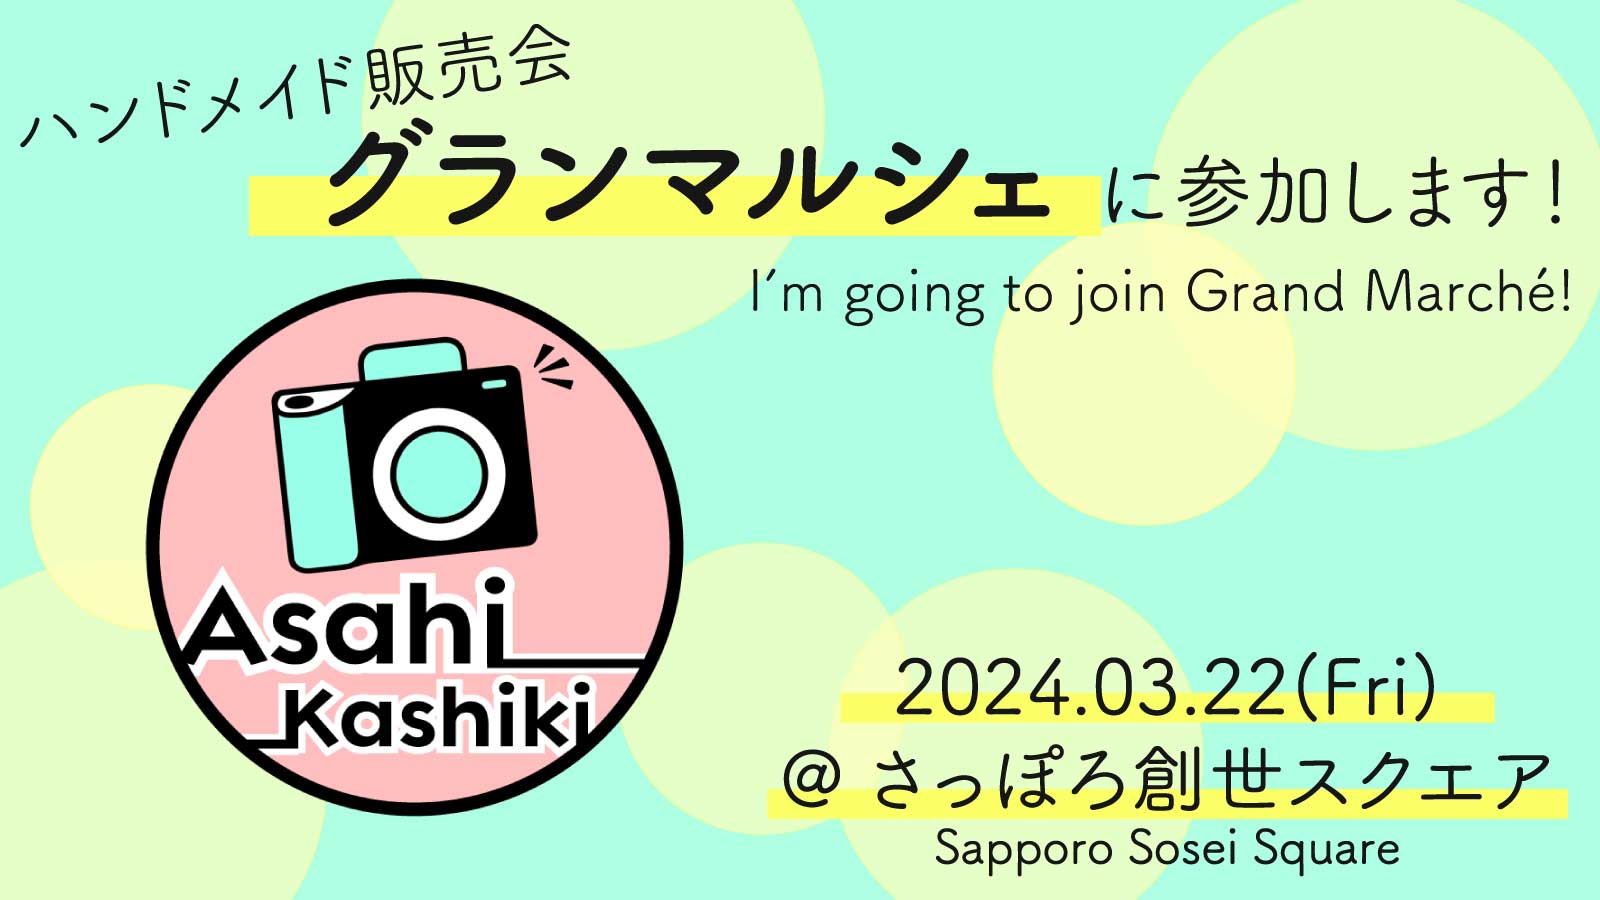 I'm going to join Hand-made market, Grand Marché. The 22nd of March, 2024, Friday at Sapporo Sosei Square.